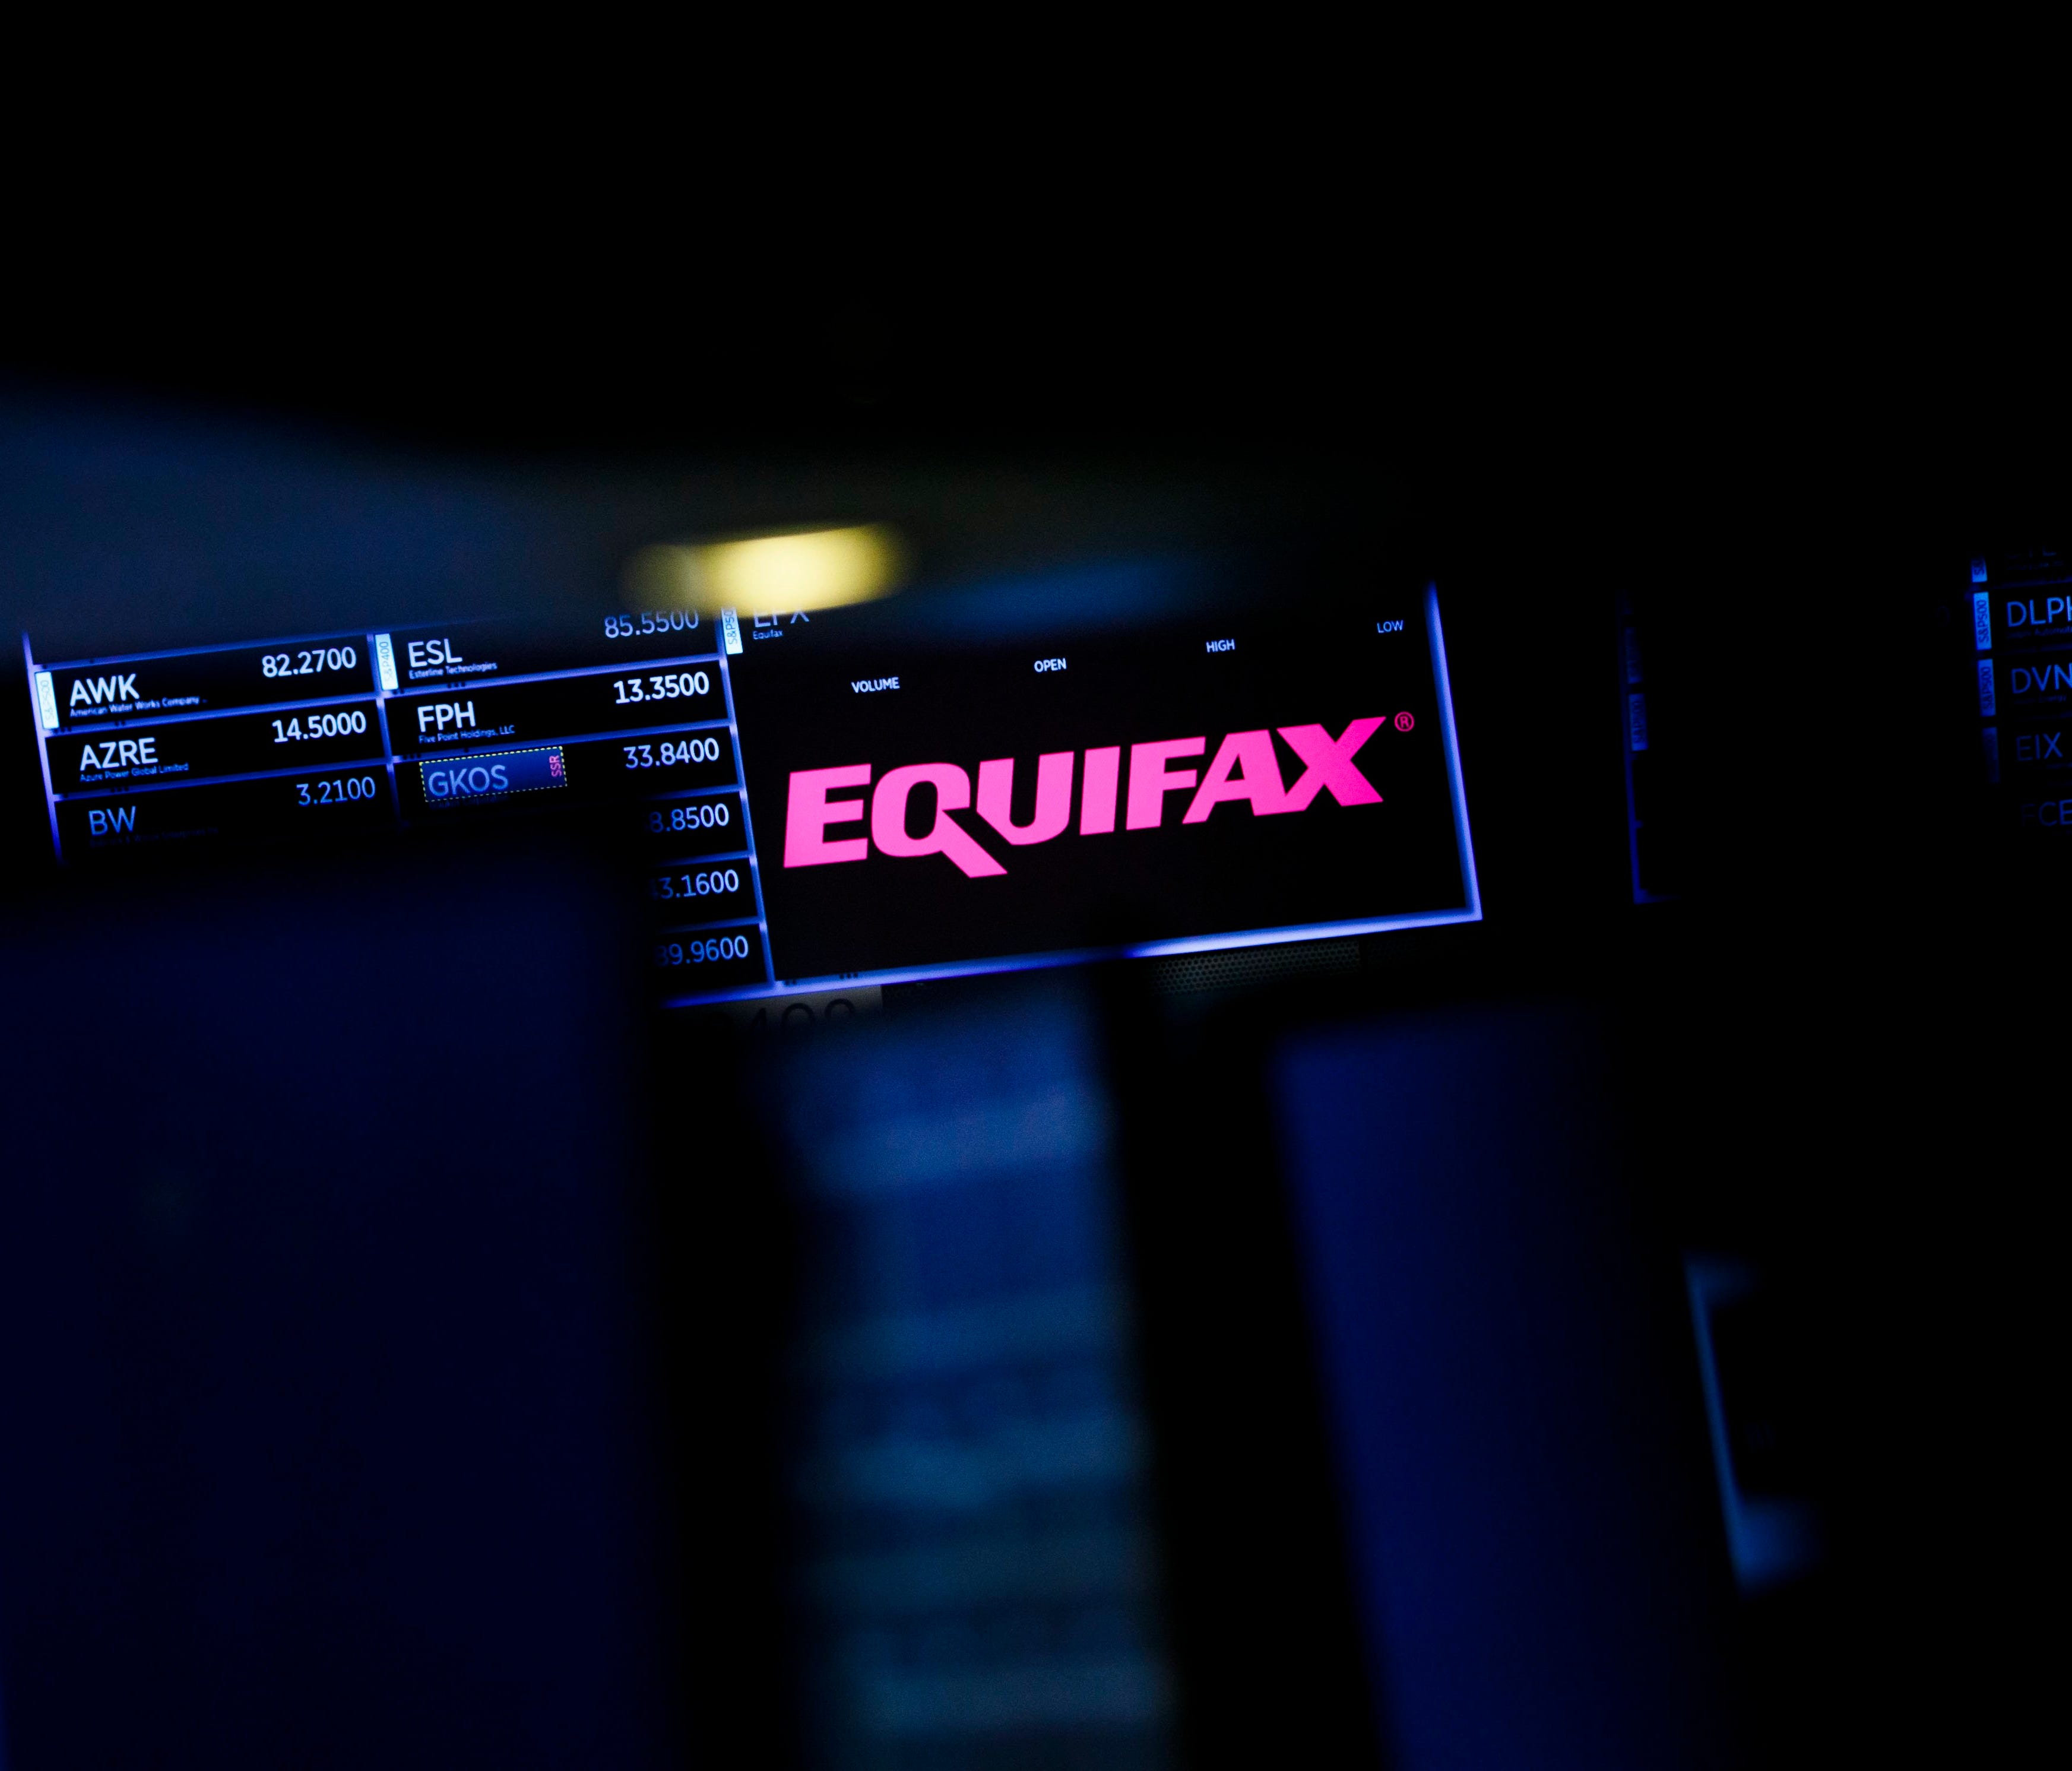 A view of a sign for the company Equifax on the floor of the New York Stock Exchange.  (EPA-EFE/JUSTIN LANE)